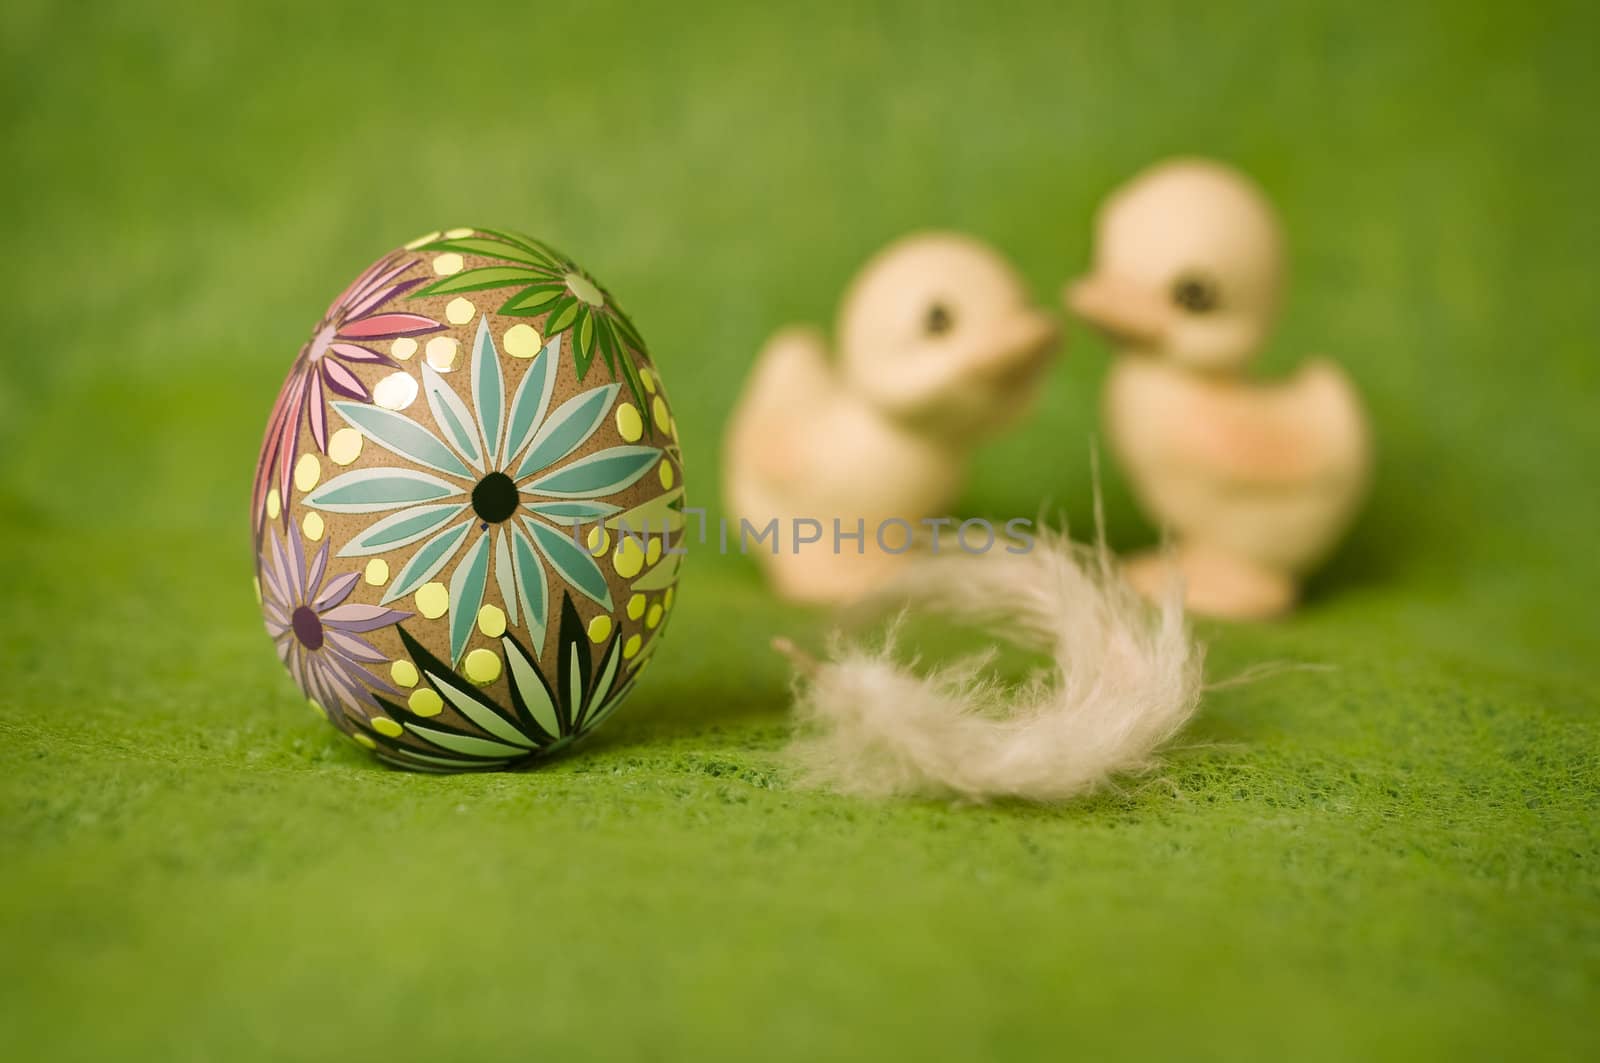 easter composition with an egg and two ducklings
